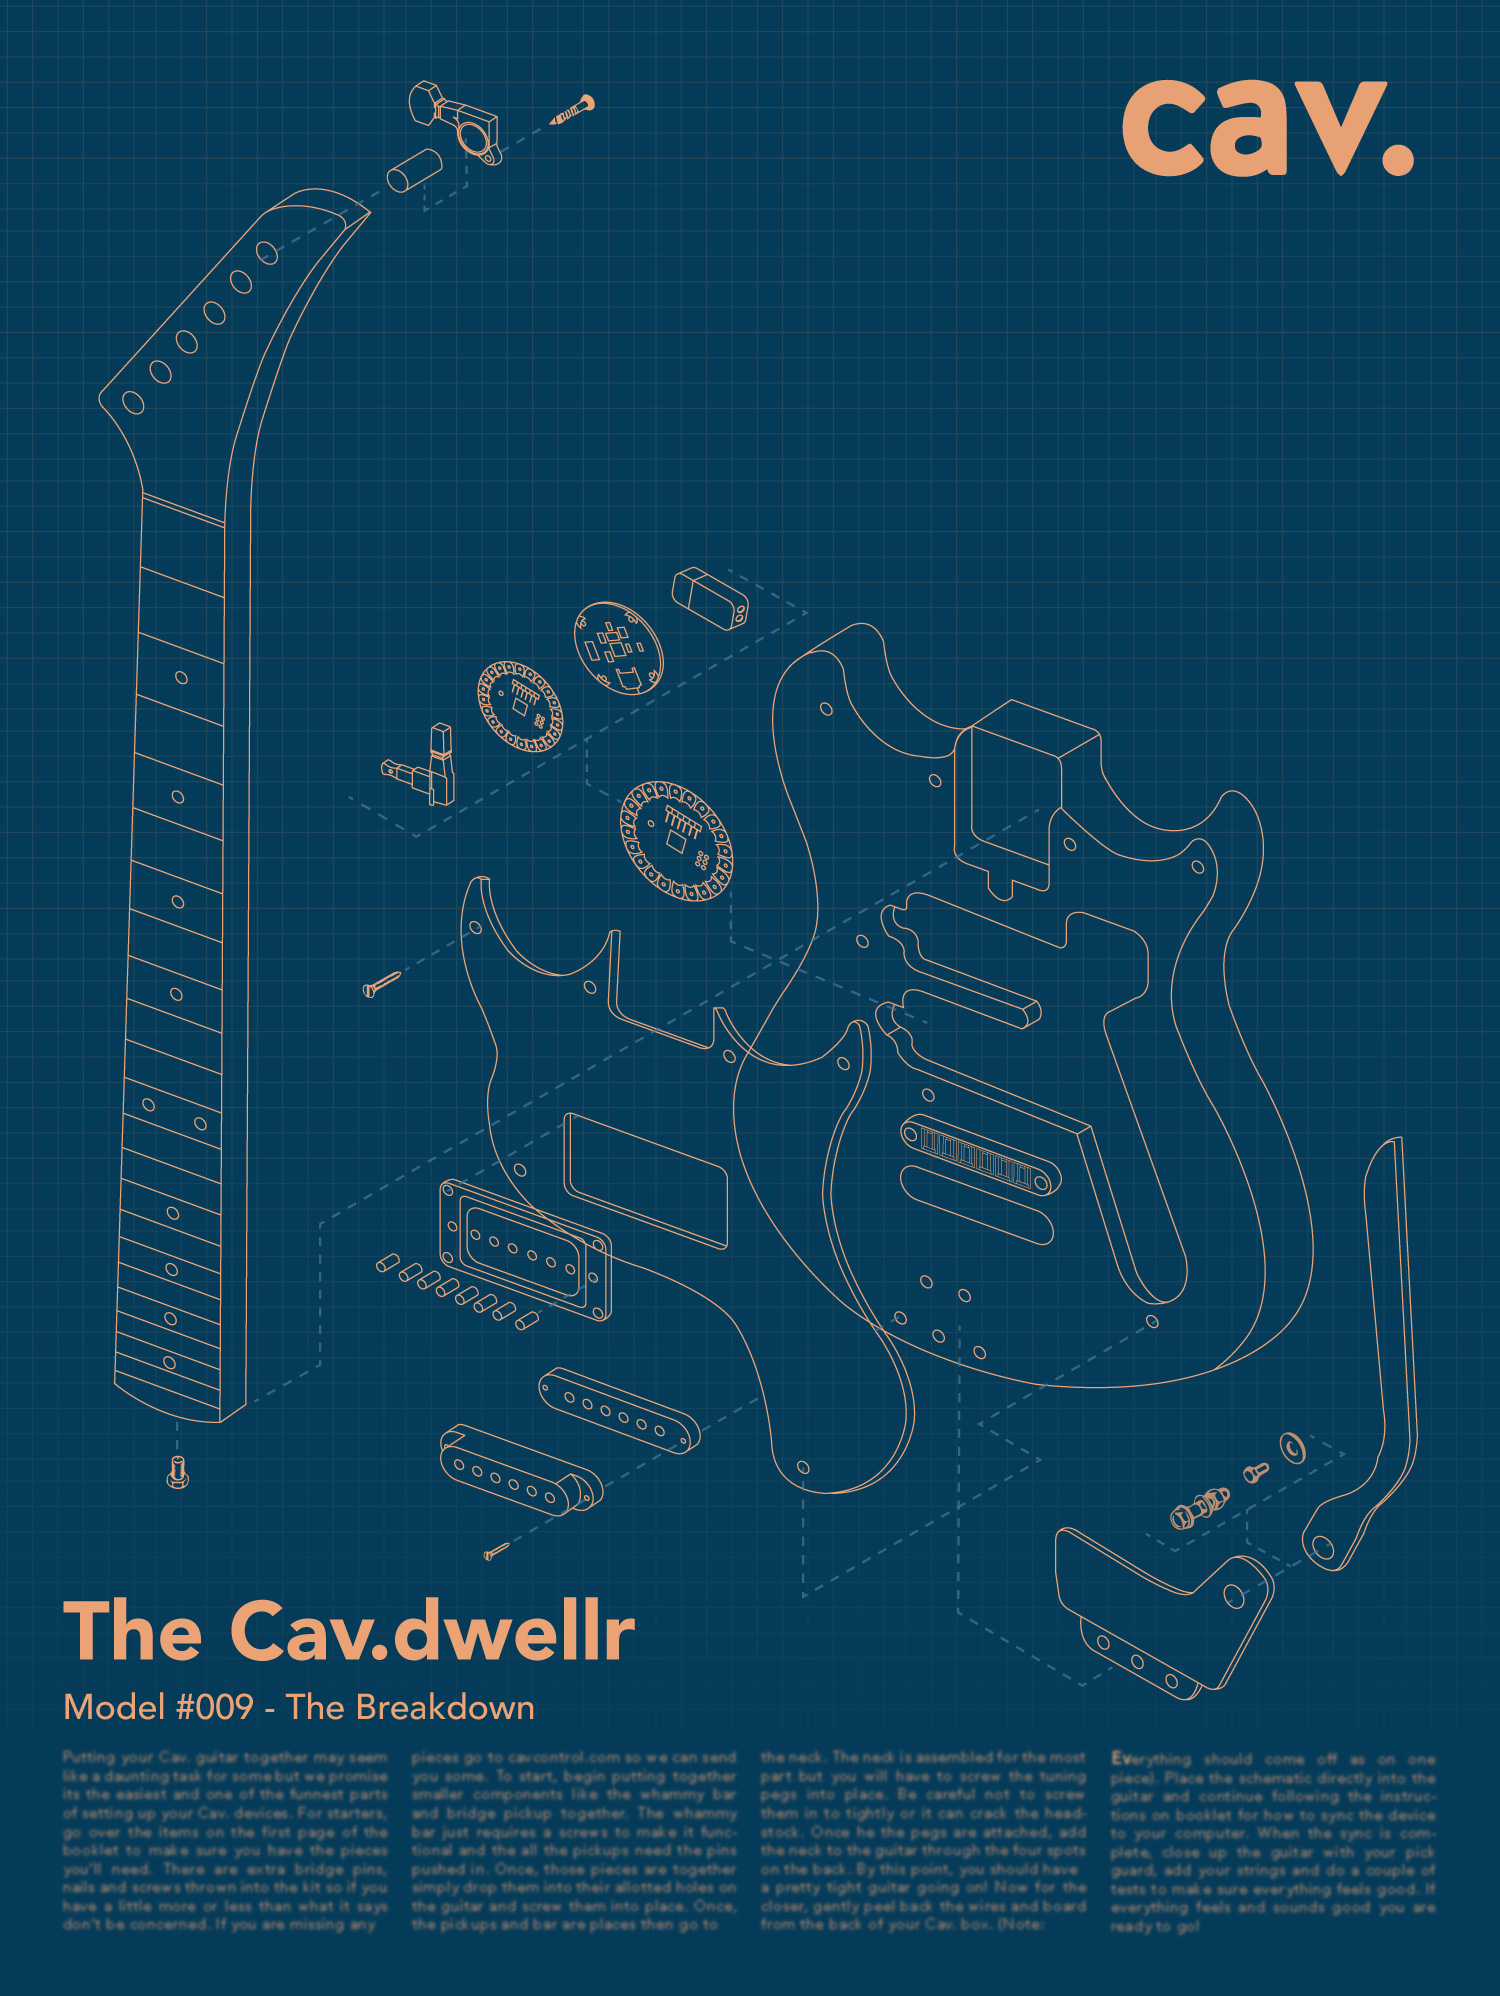 Cav.dwellr poster that folds in a pamphlet